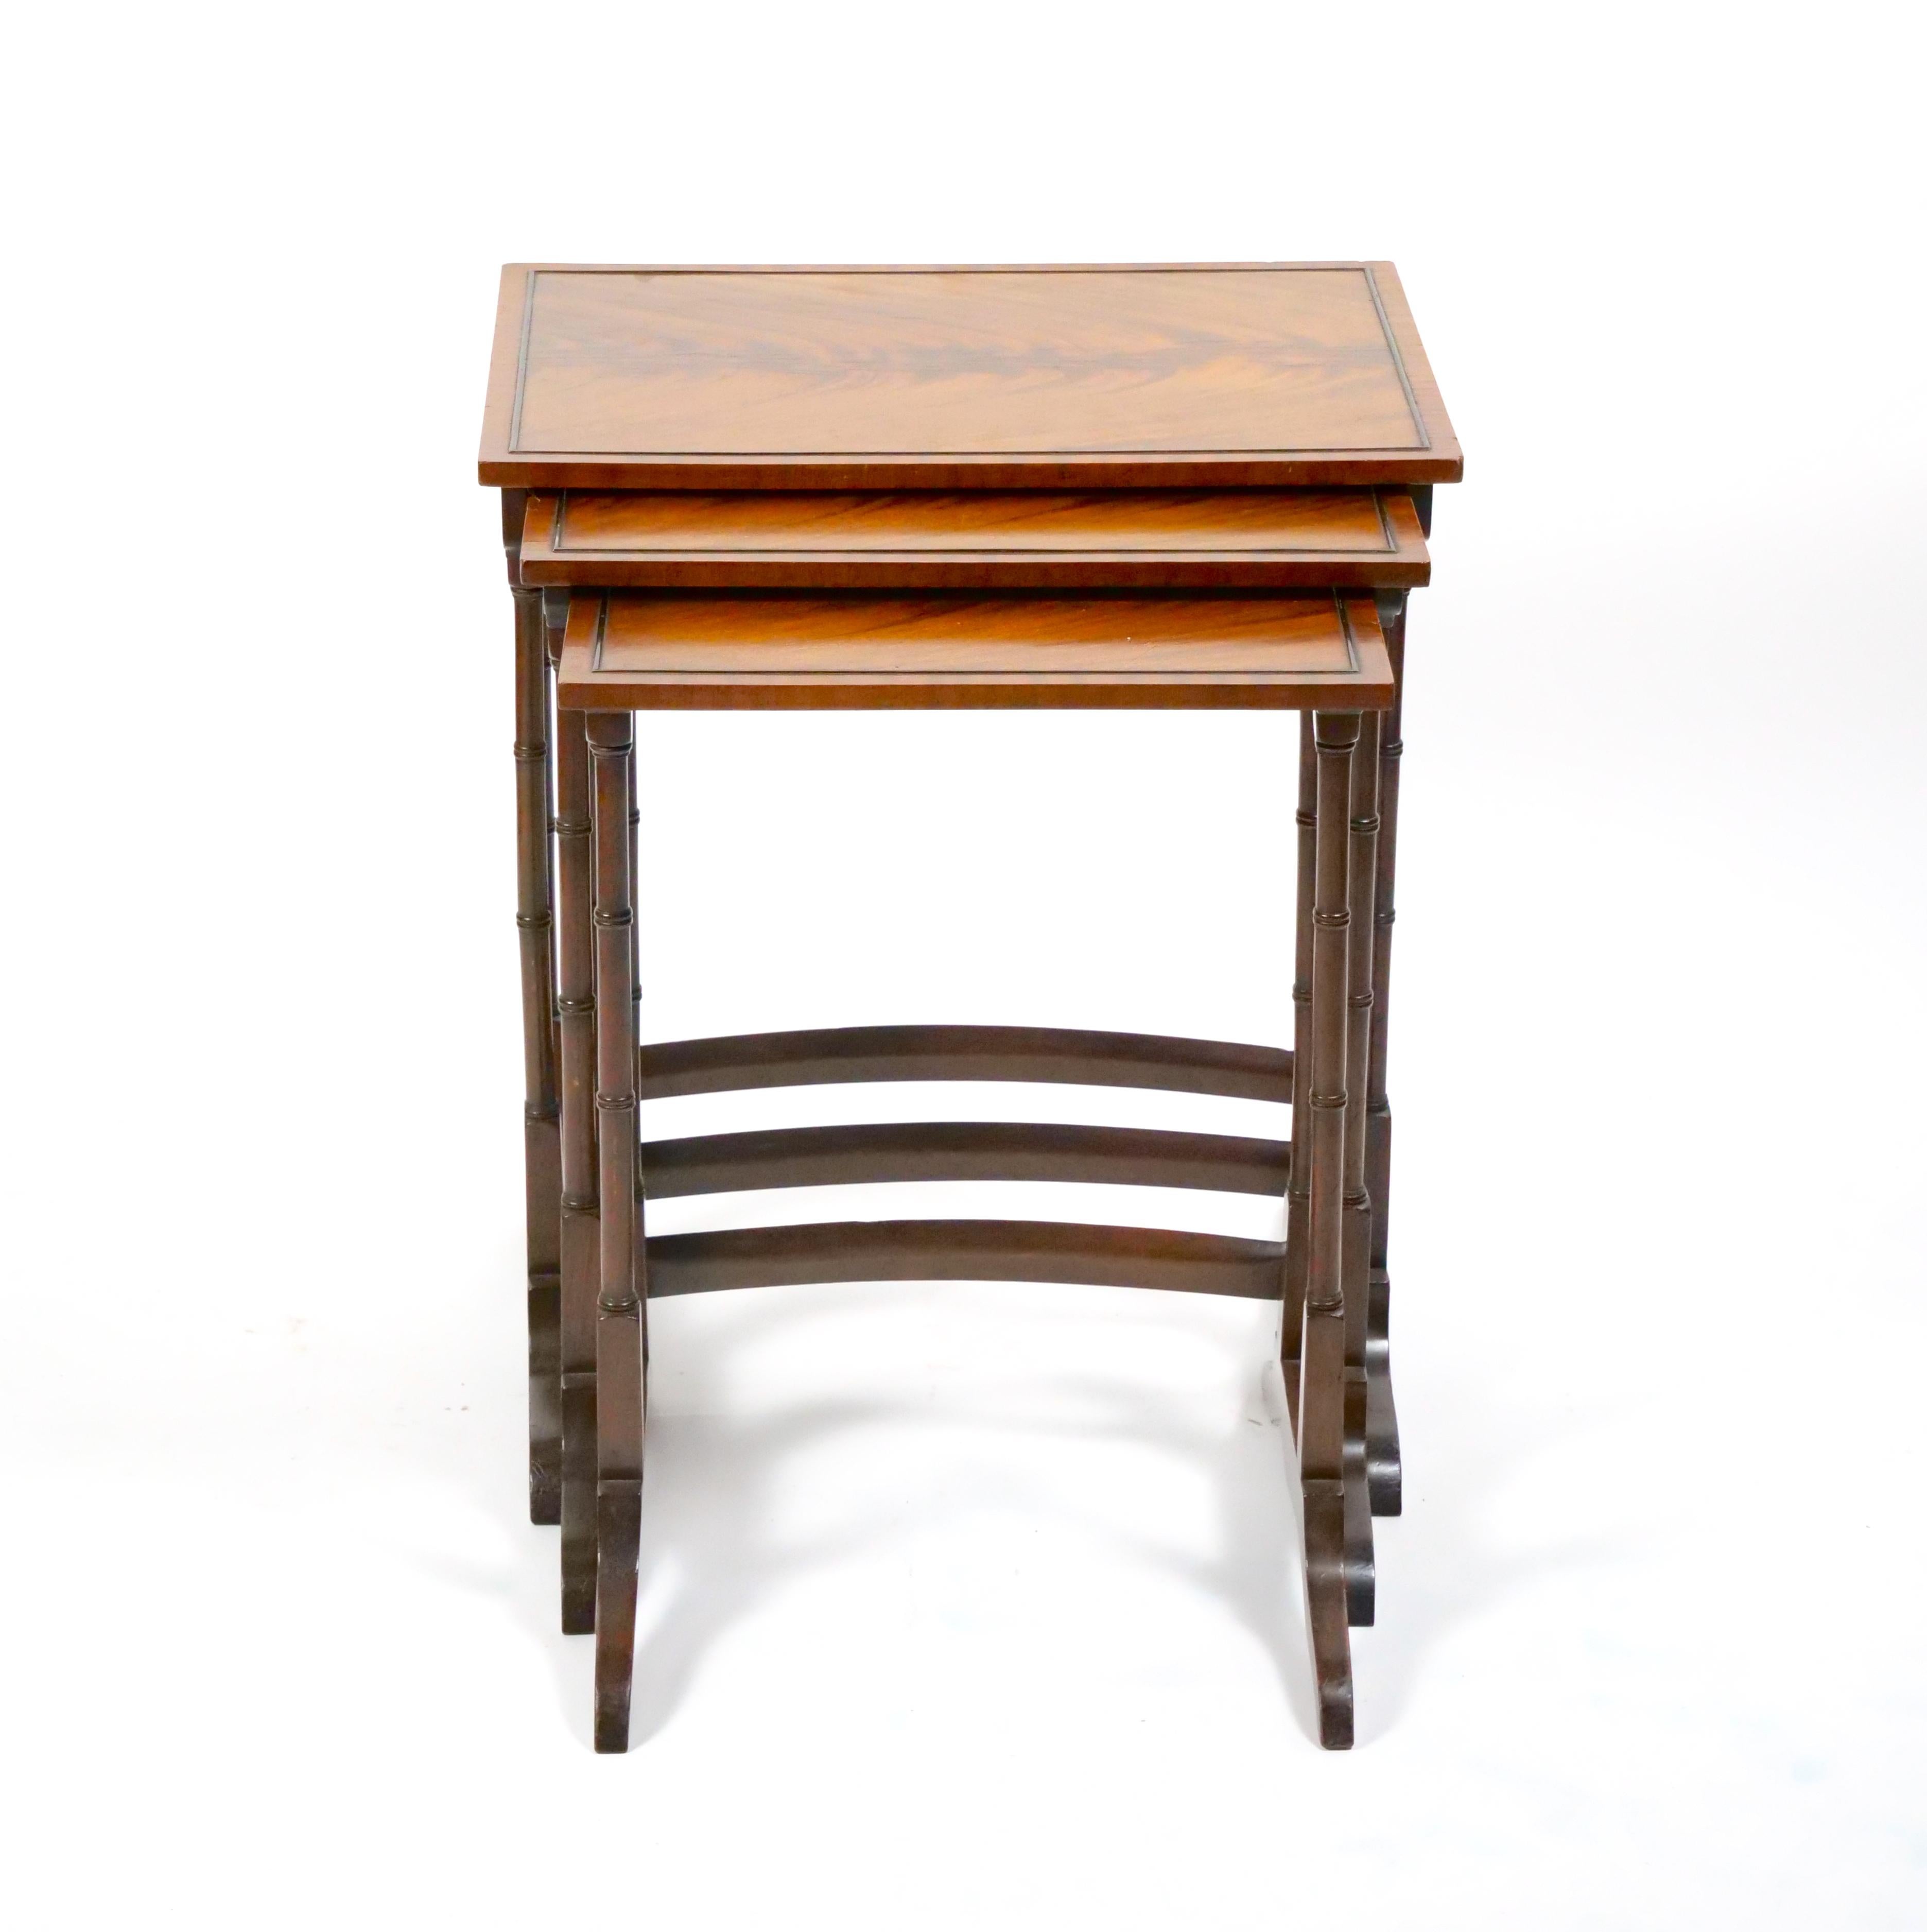 English 19th century Mahogany Inlaid Top Decorated Stacking Tables For Sale